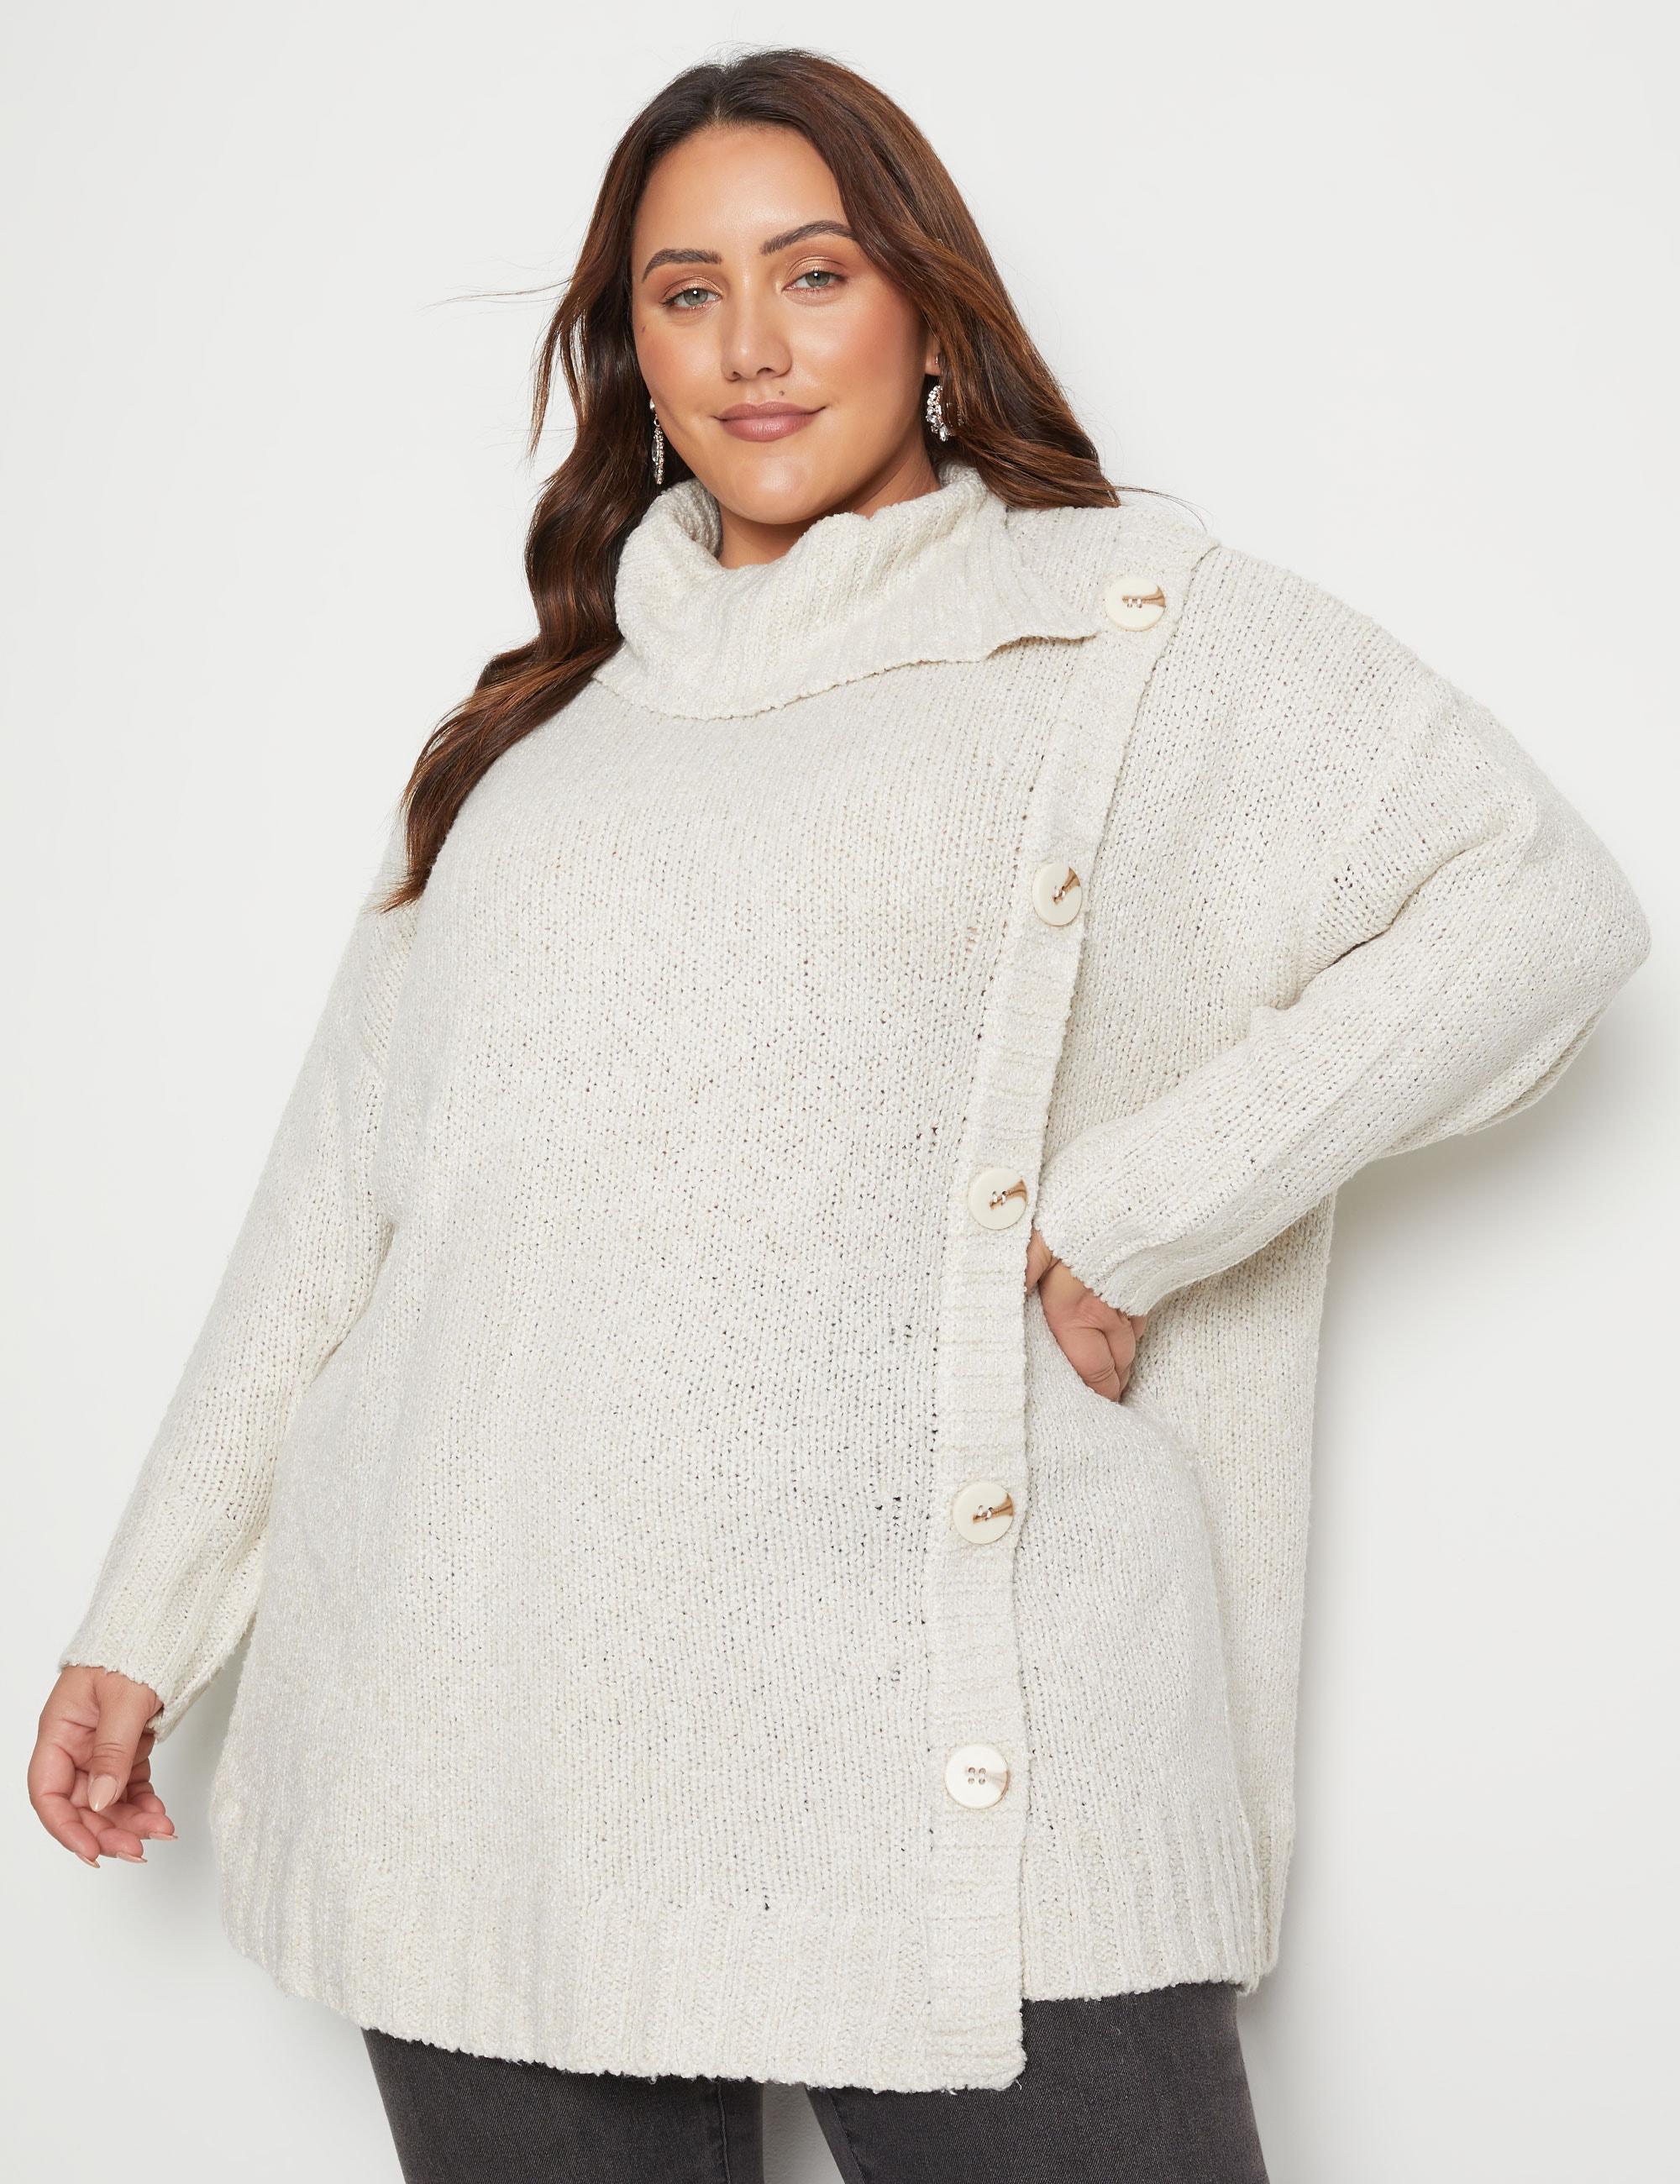 BeMe - Plus Size - Womens Jumper - Long Winter Sweater - Brown Pullover Button - Knitwear - Long Sleeve - Tan White - Relaxed Fit - High Neck - Casual